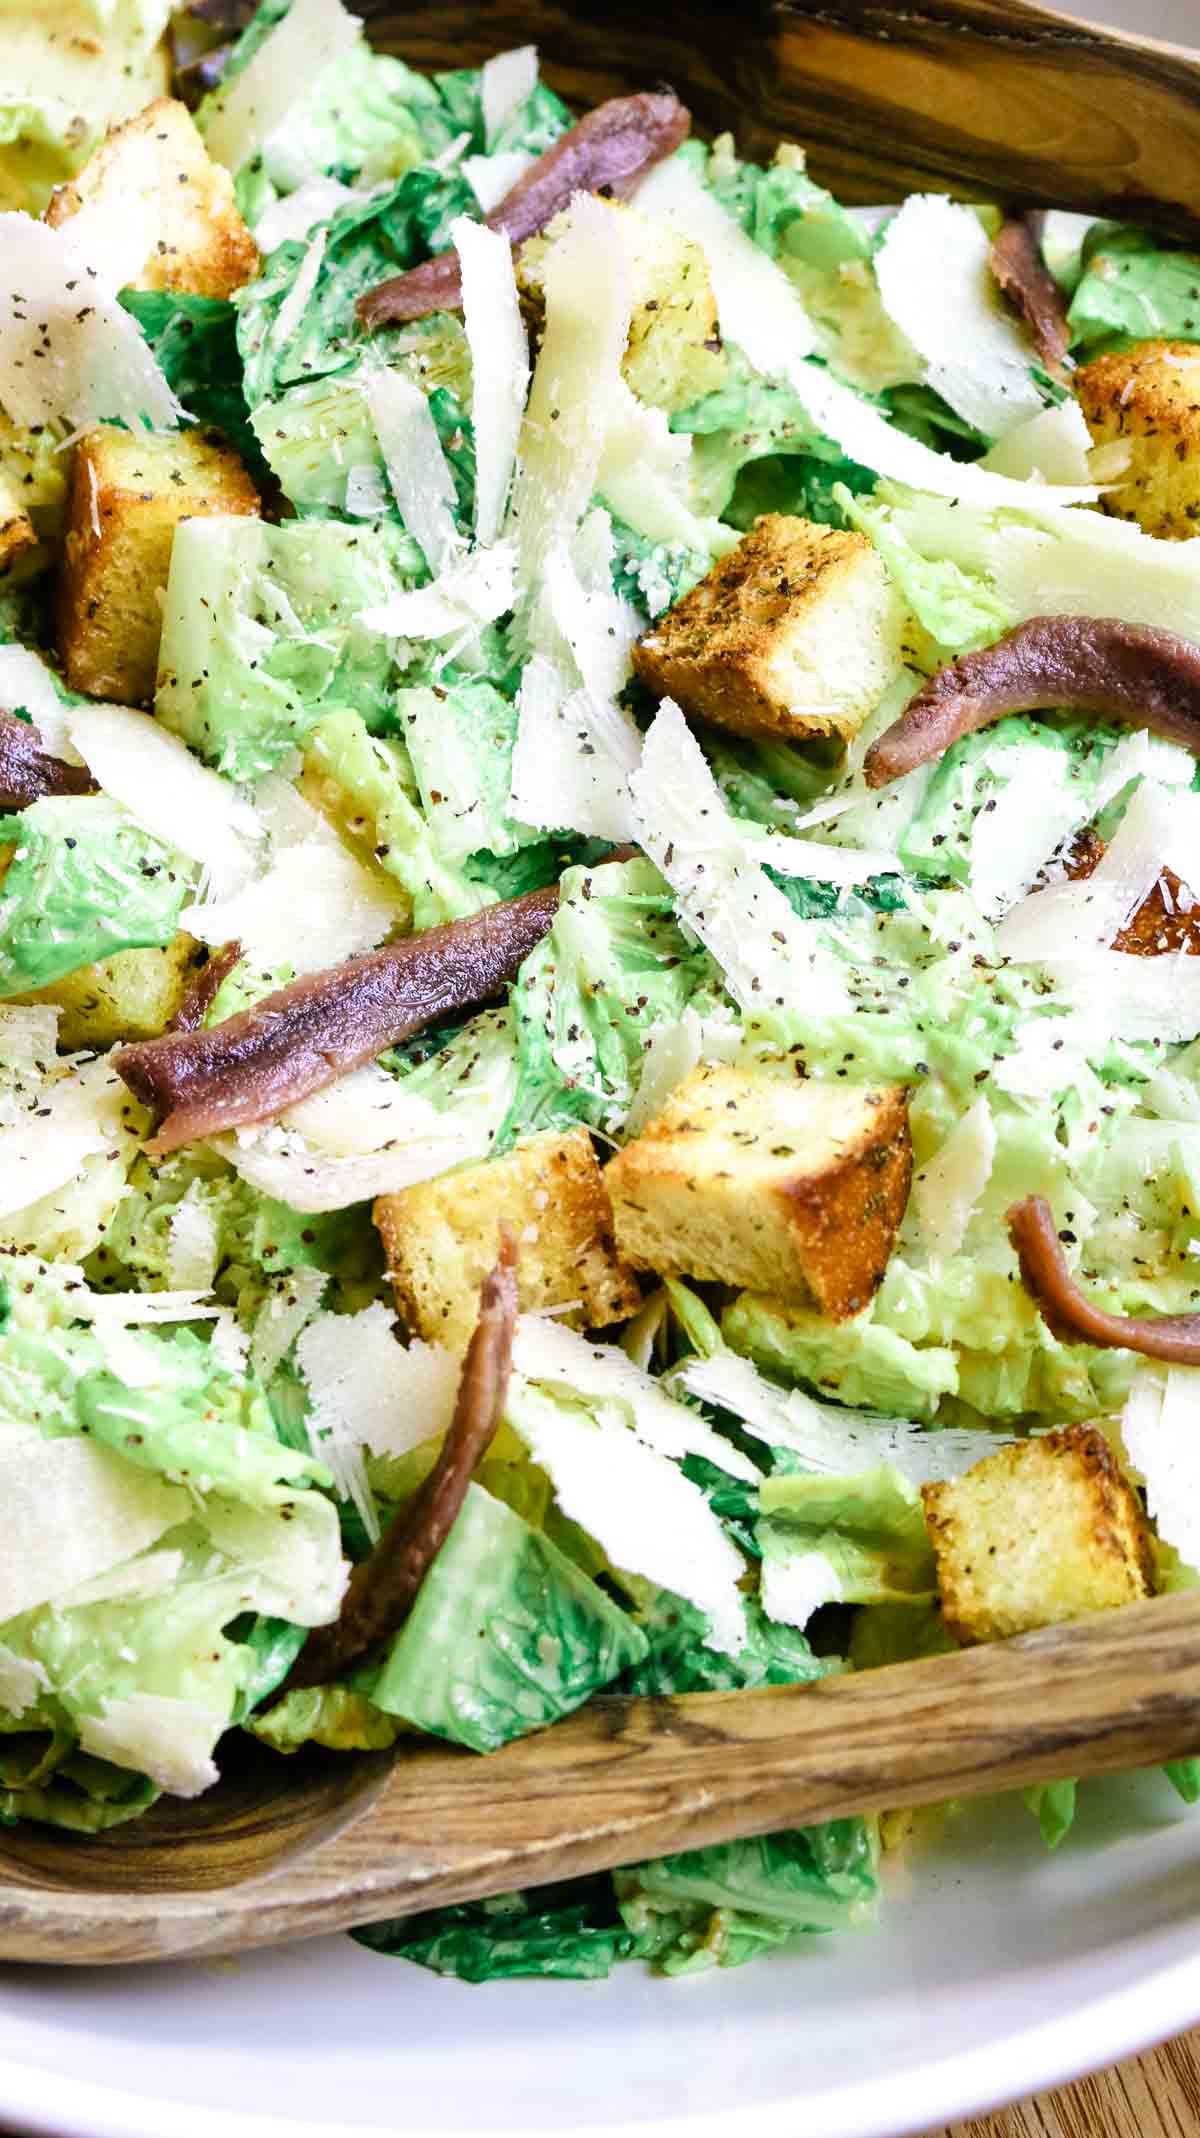 upclose photo of romain lettuce, croutons and anchovies